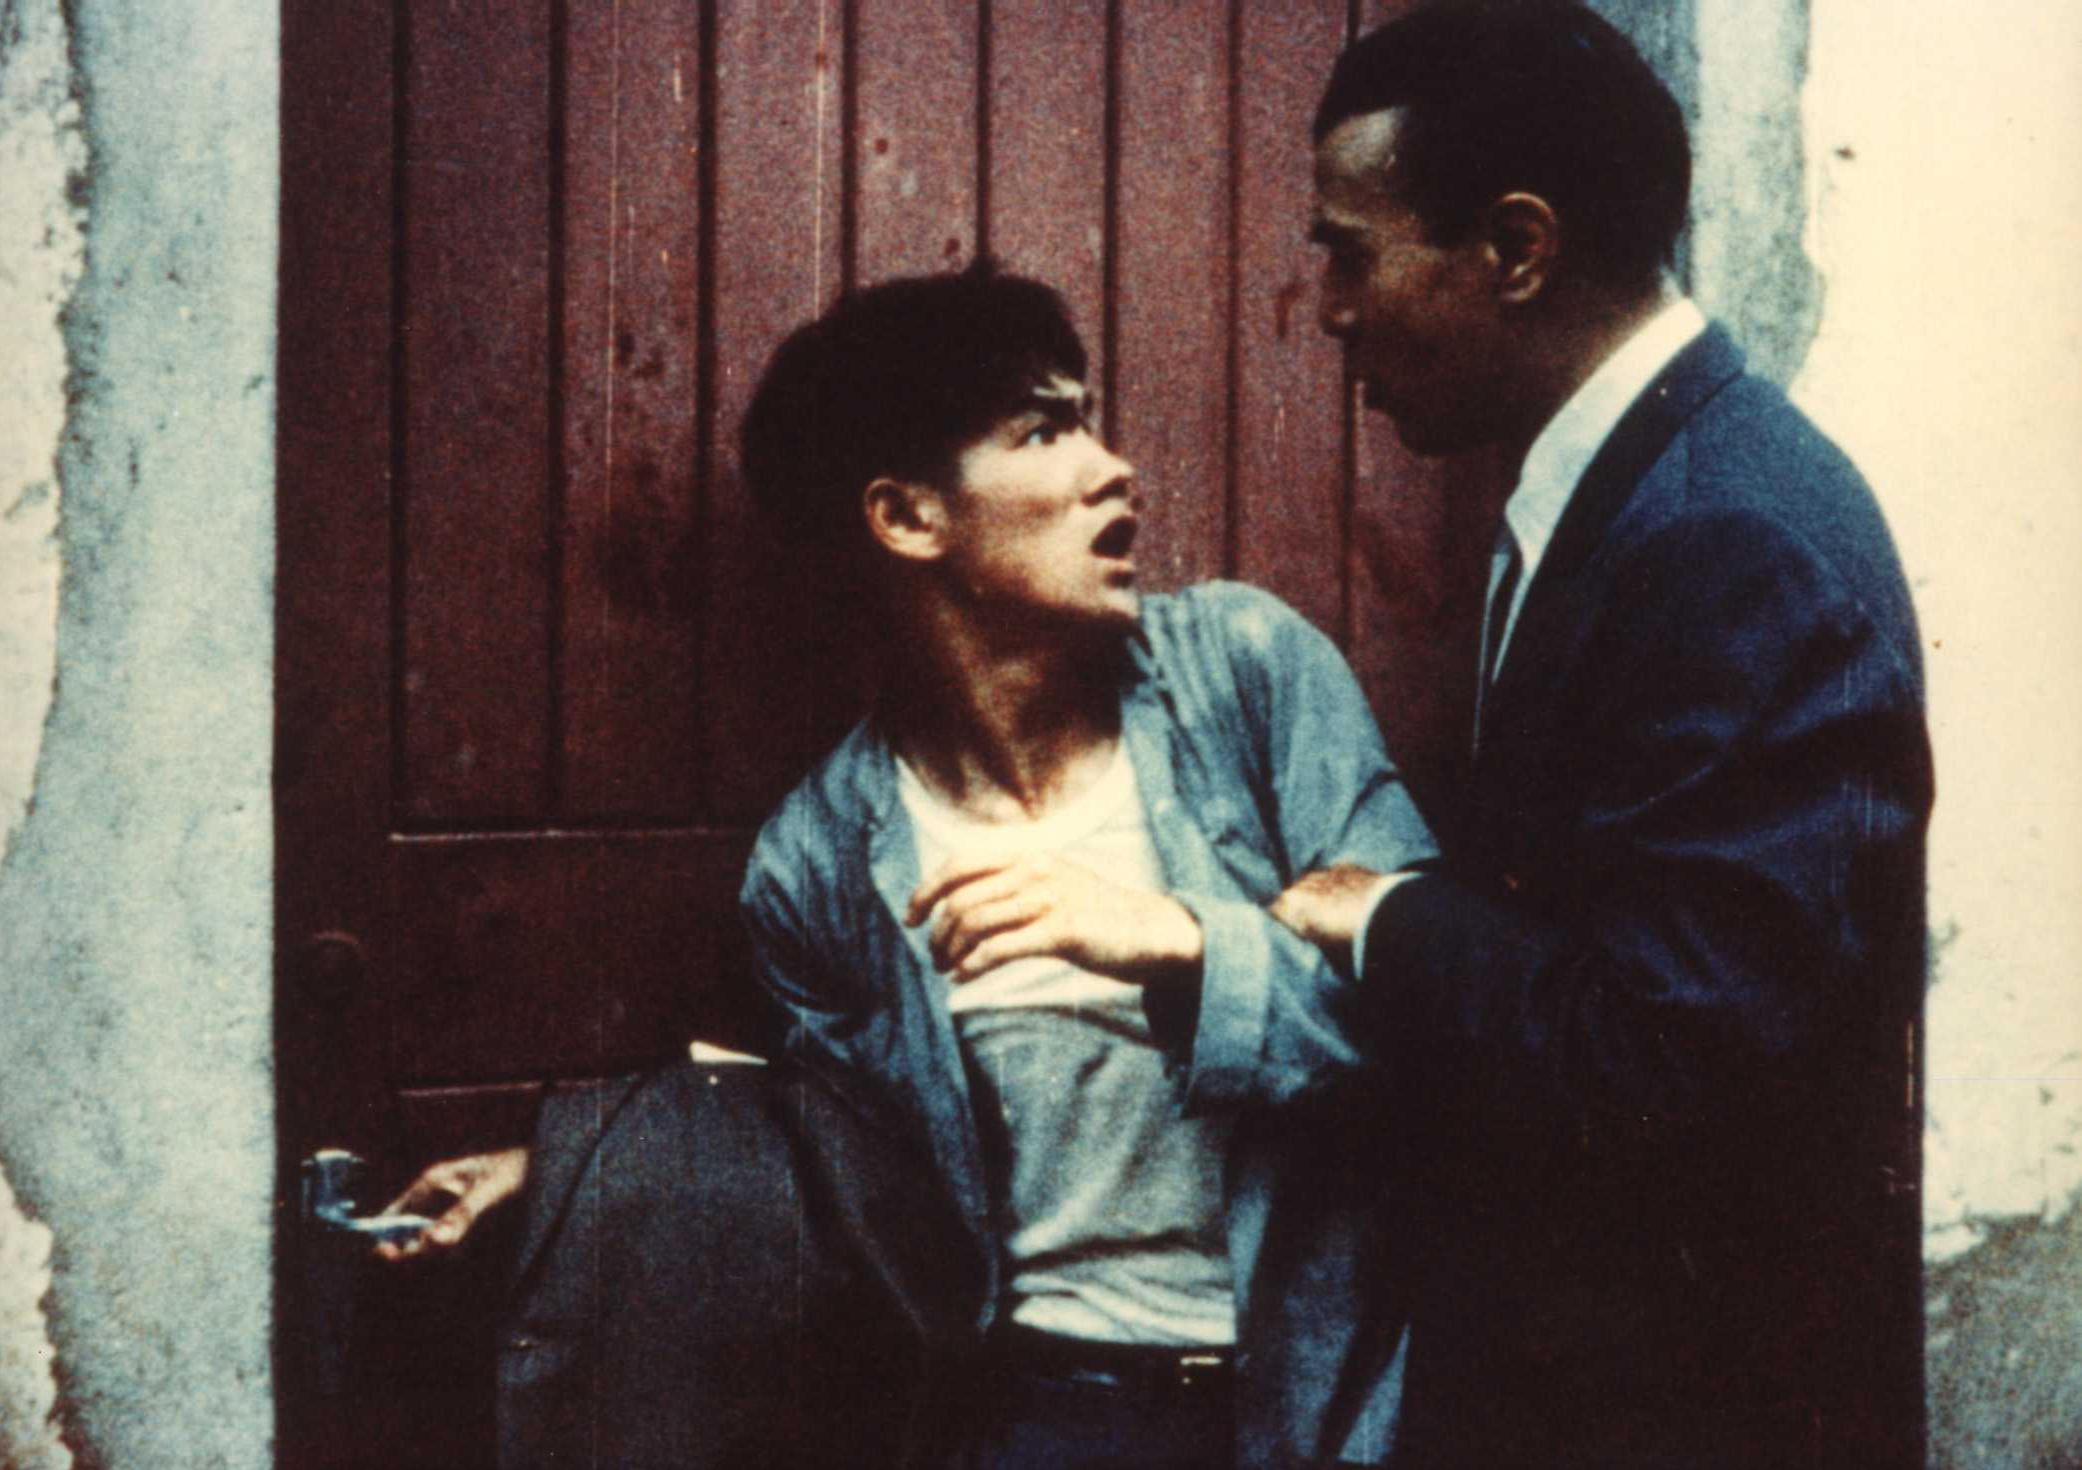 Launched by the Hong Kong Film Archive of the Leisure and Cultural Services Department, the "Movies to GO" series will present a free screening of superstar Bruce Lee's classic film "The Orphan" (1960), made before he went to the US, at the 1/F Theatre of the Hong Kong Heritage Museum (HKHM) at noon on July 30 to tie in the "A Man Beyond the Ordinary: Bruce Lee" exhibition at the HKHM. The public are invited to attend. Photo shows a film still of "The Orphan".